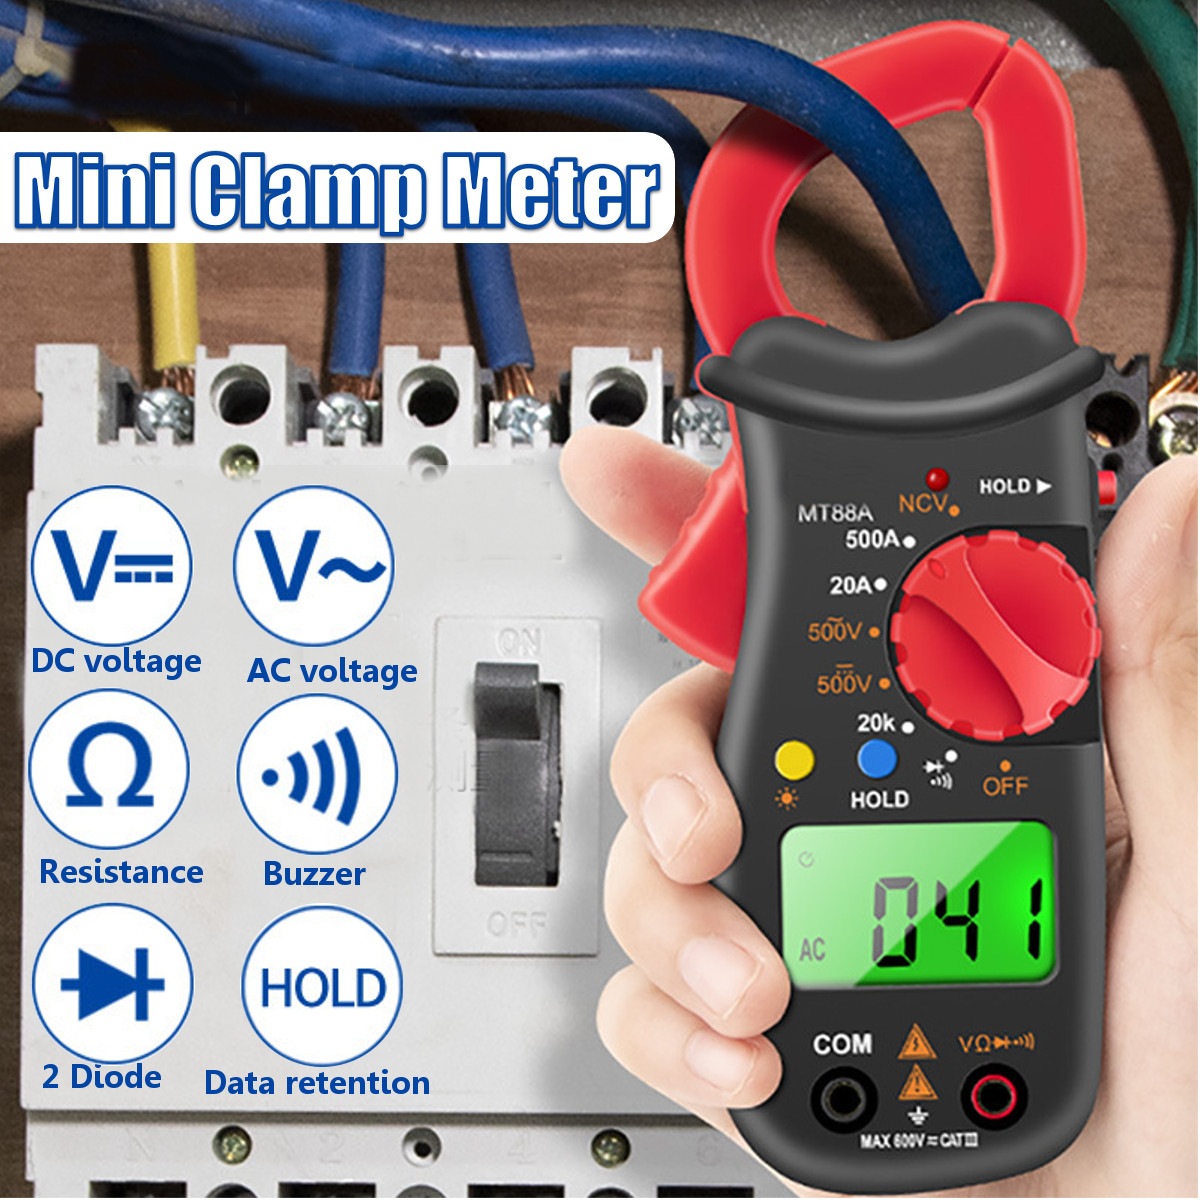 ANENG-MT88A-Digital-Clamp-Meter-Multimeter-DCAC-Voltage-AC-Current-Tester-Frequency-Capacitance-NCV--1751874-1